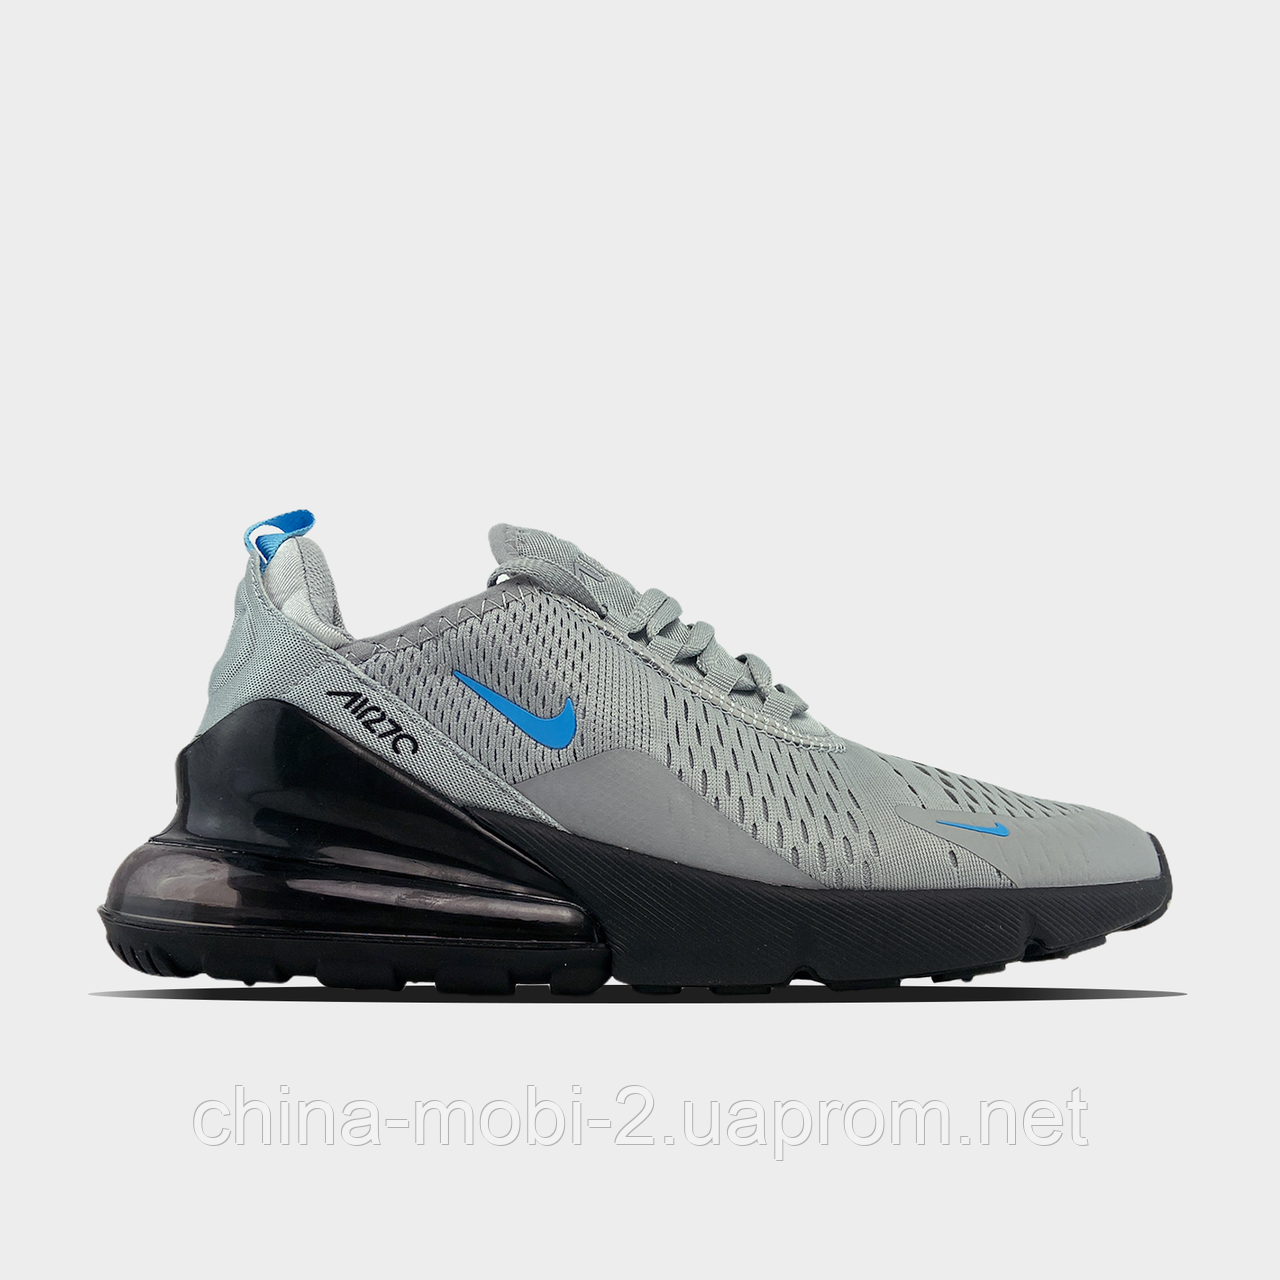 Nike Air Max 270 Cool Grey Blue Furylimited Special Sales And Special Offers Women S Men S Sneakers Sports Shoes Shop Athletic Shoes Online Off 65 Free Shipping Fast Shippment